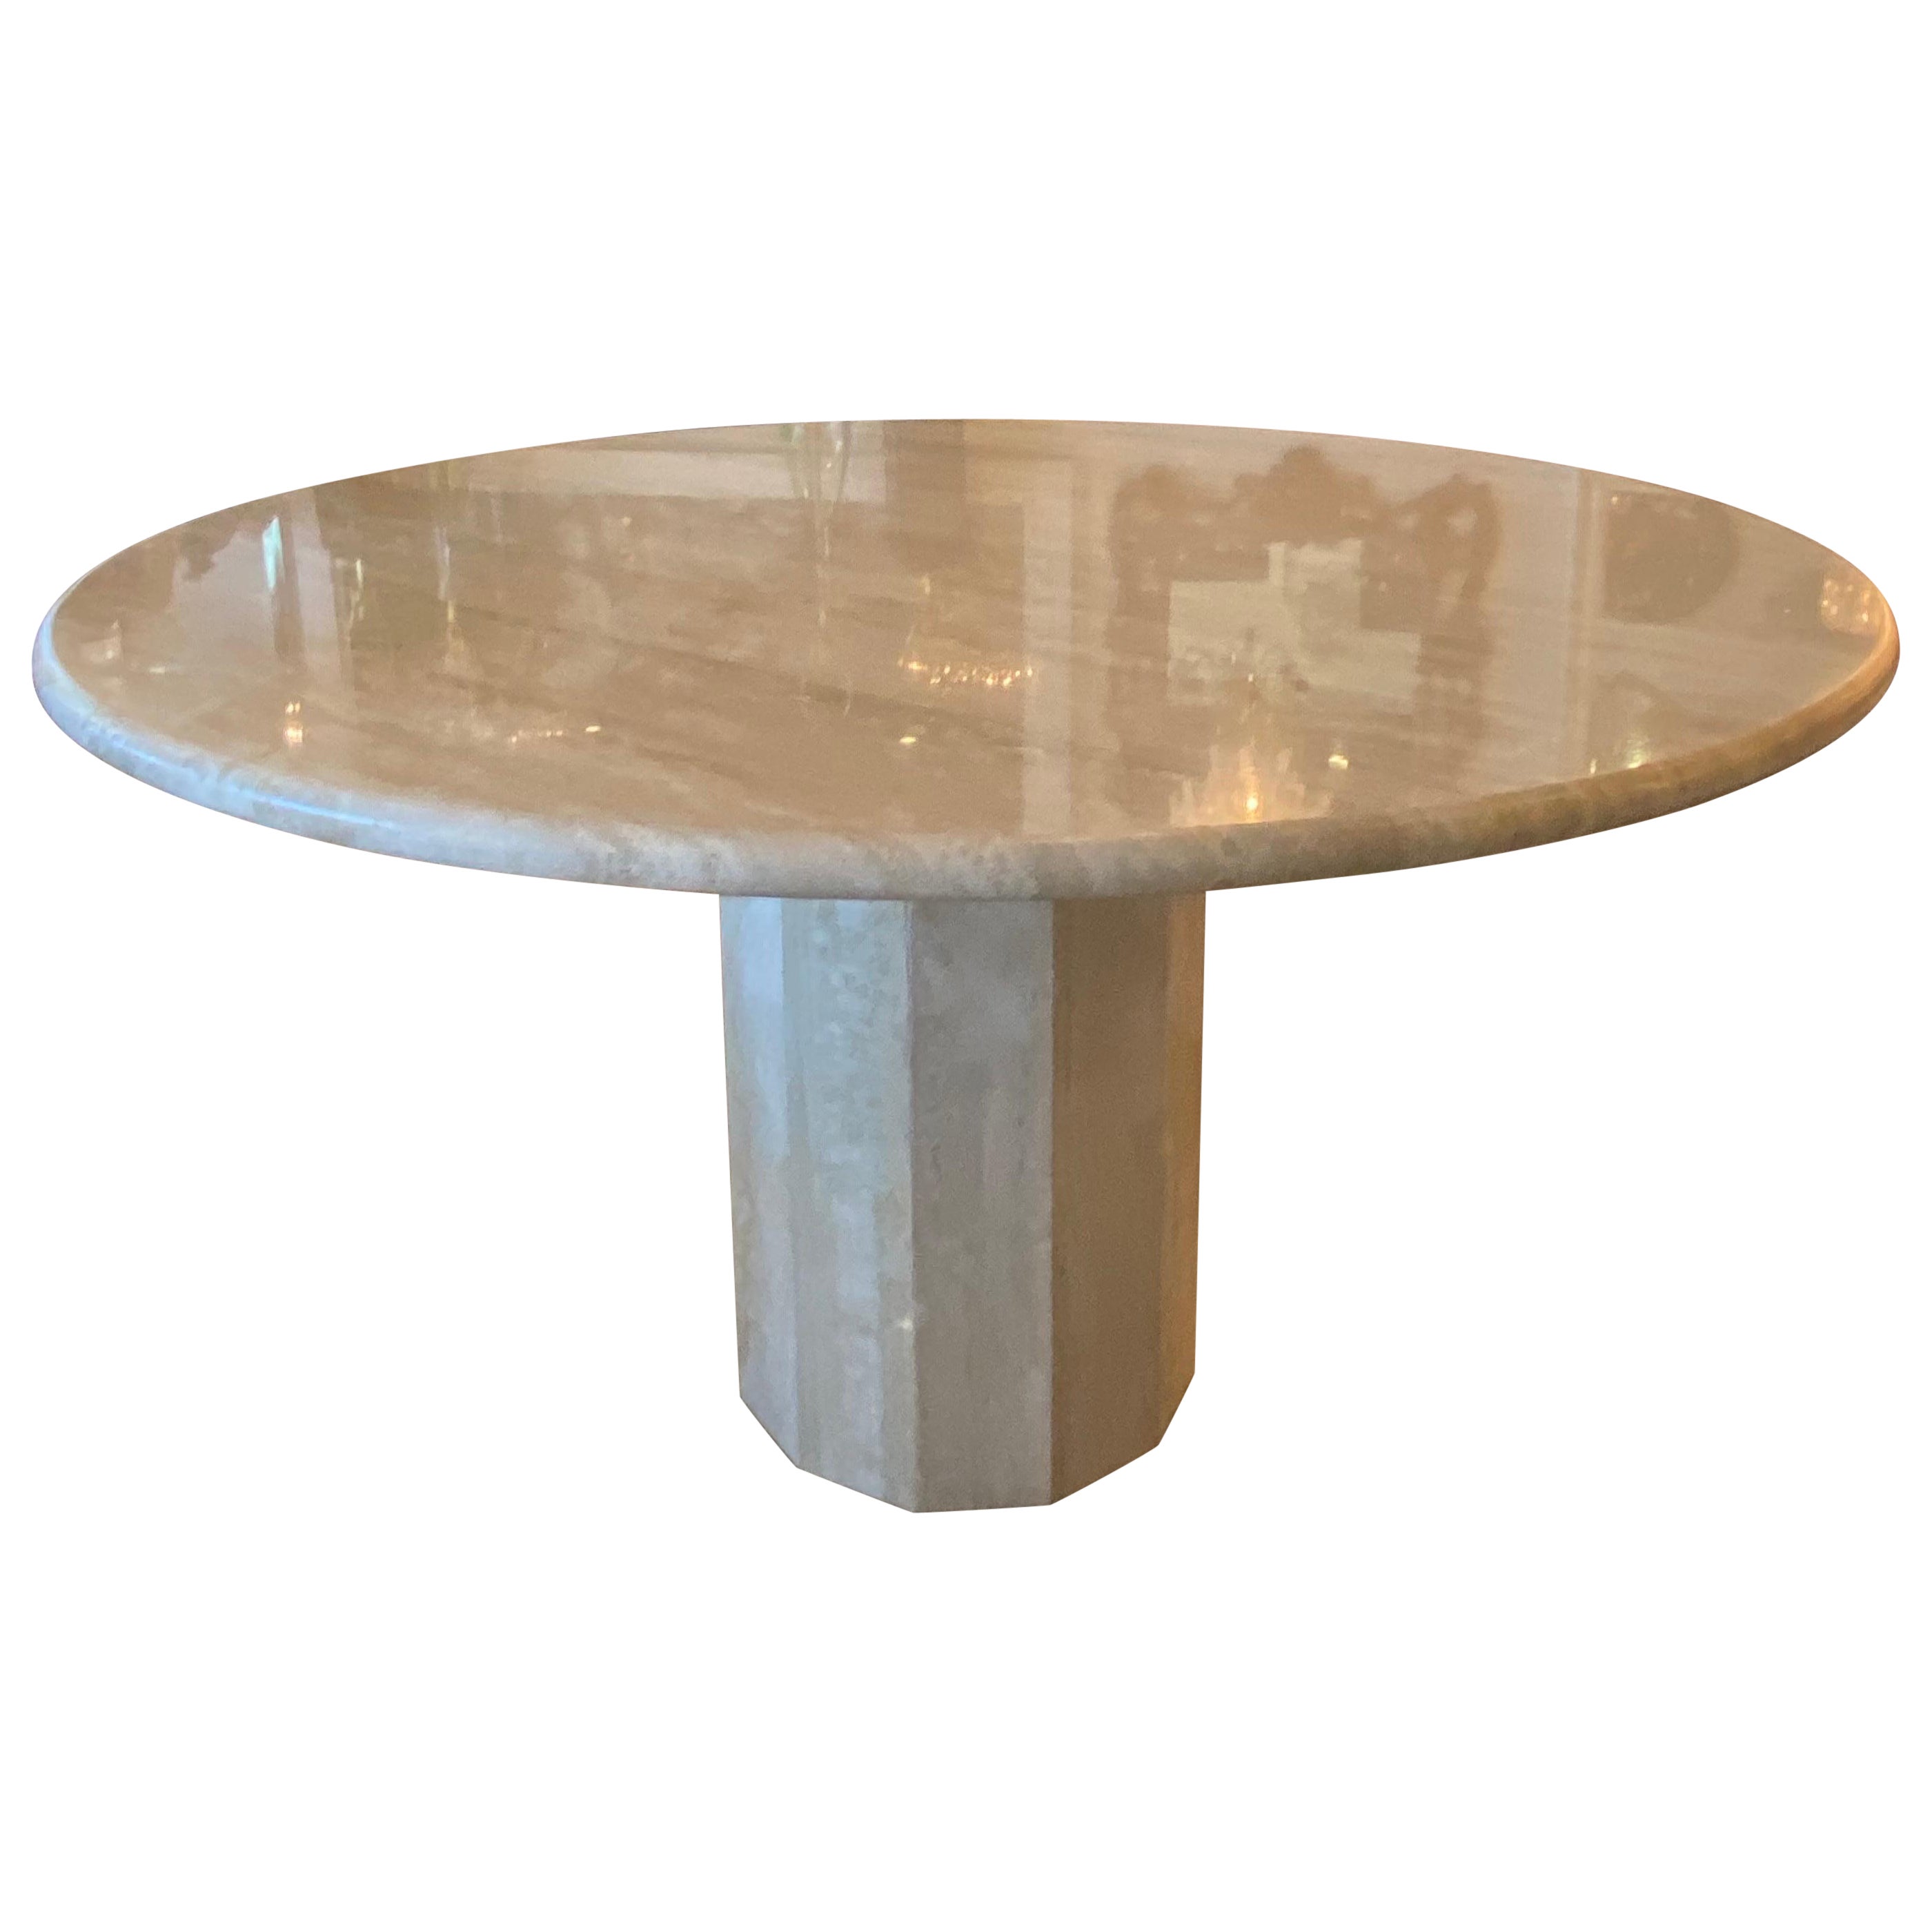 Vintage Round Italian Travertine International Stone Dining Table or Game Table 